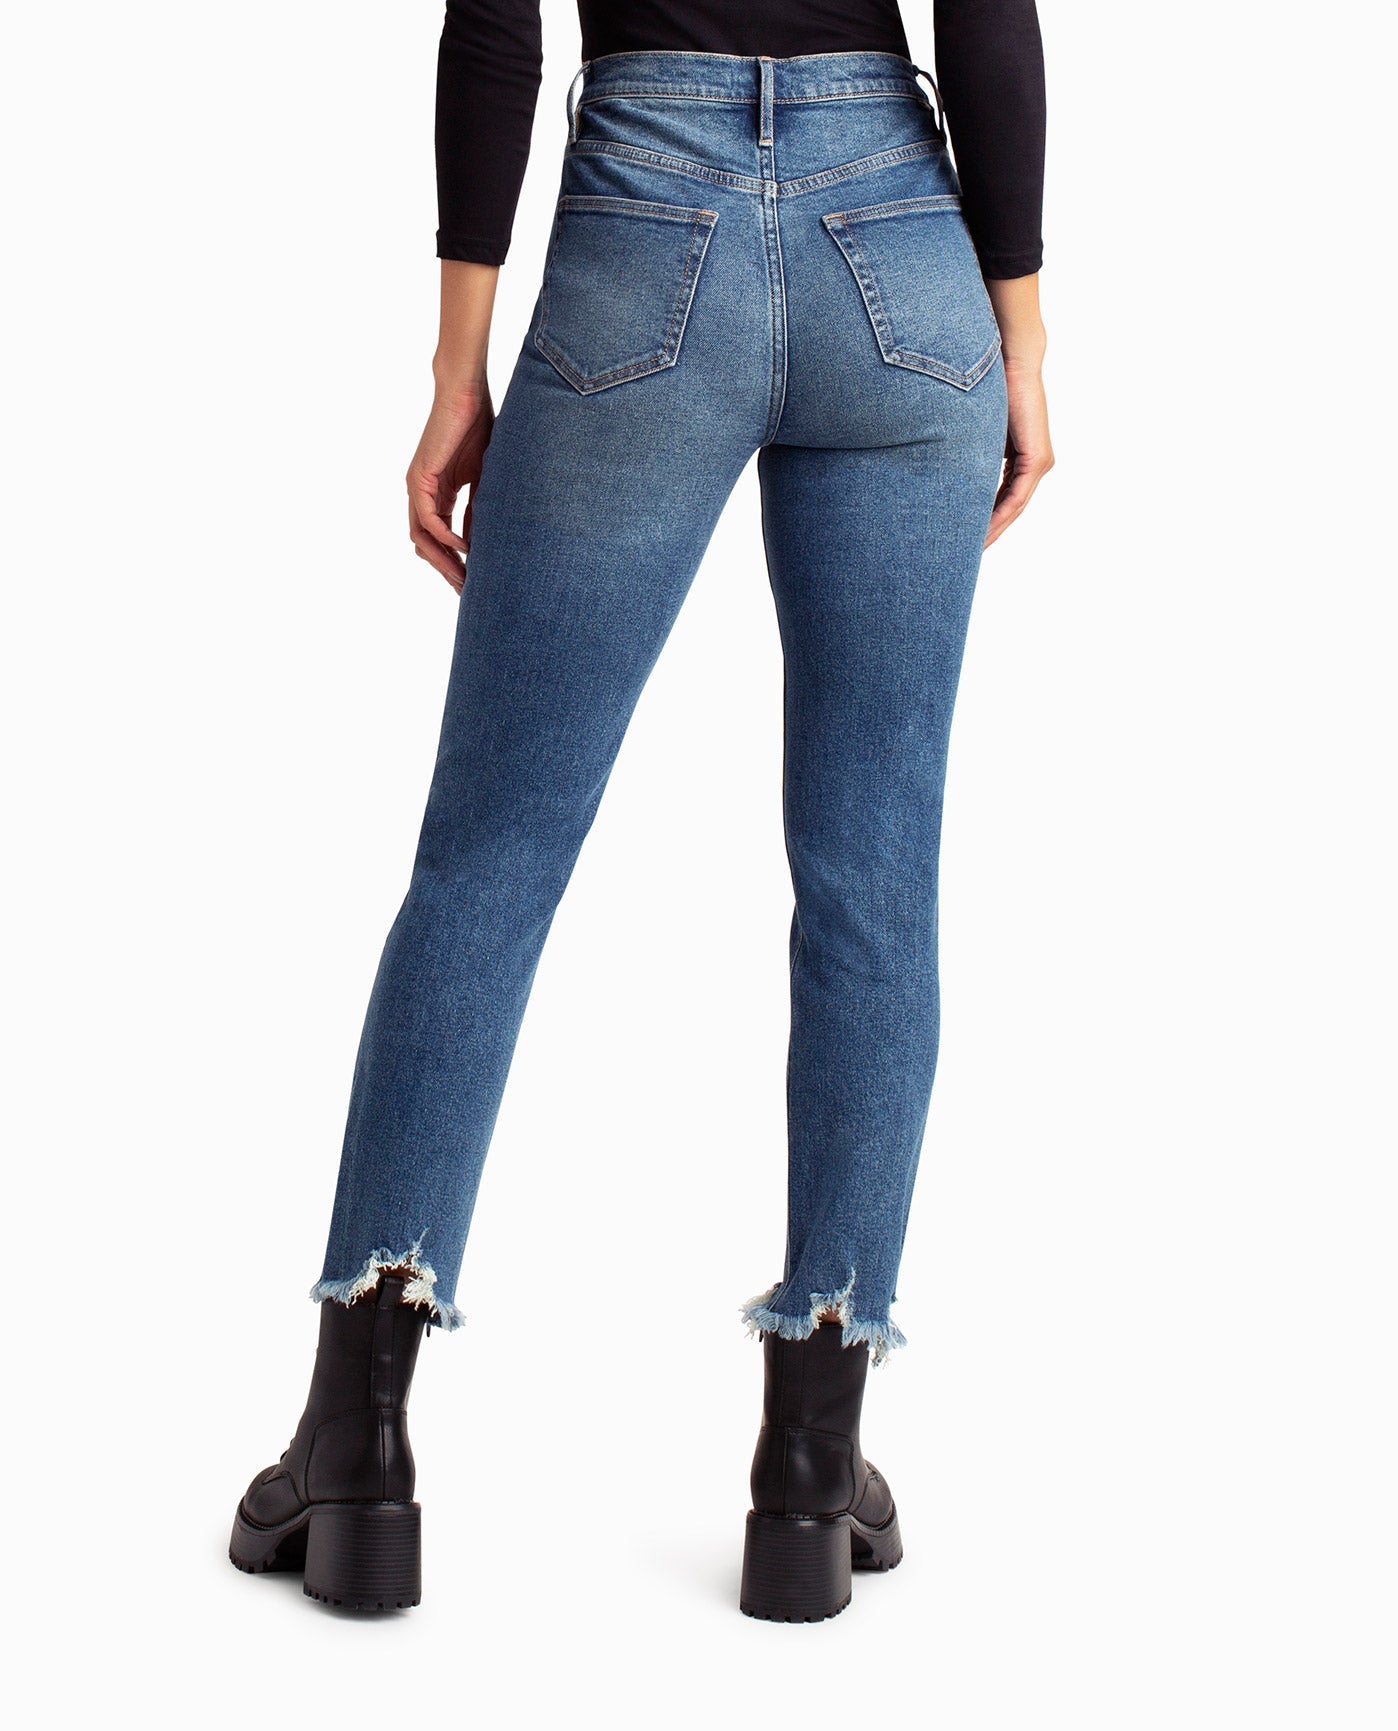 BACK OF HIGH WAISTED SLIM FIT JEAN WITH DISTRESSED BOTTOM | Dark Blue